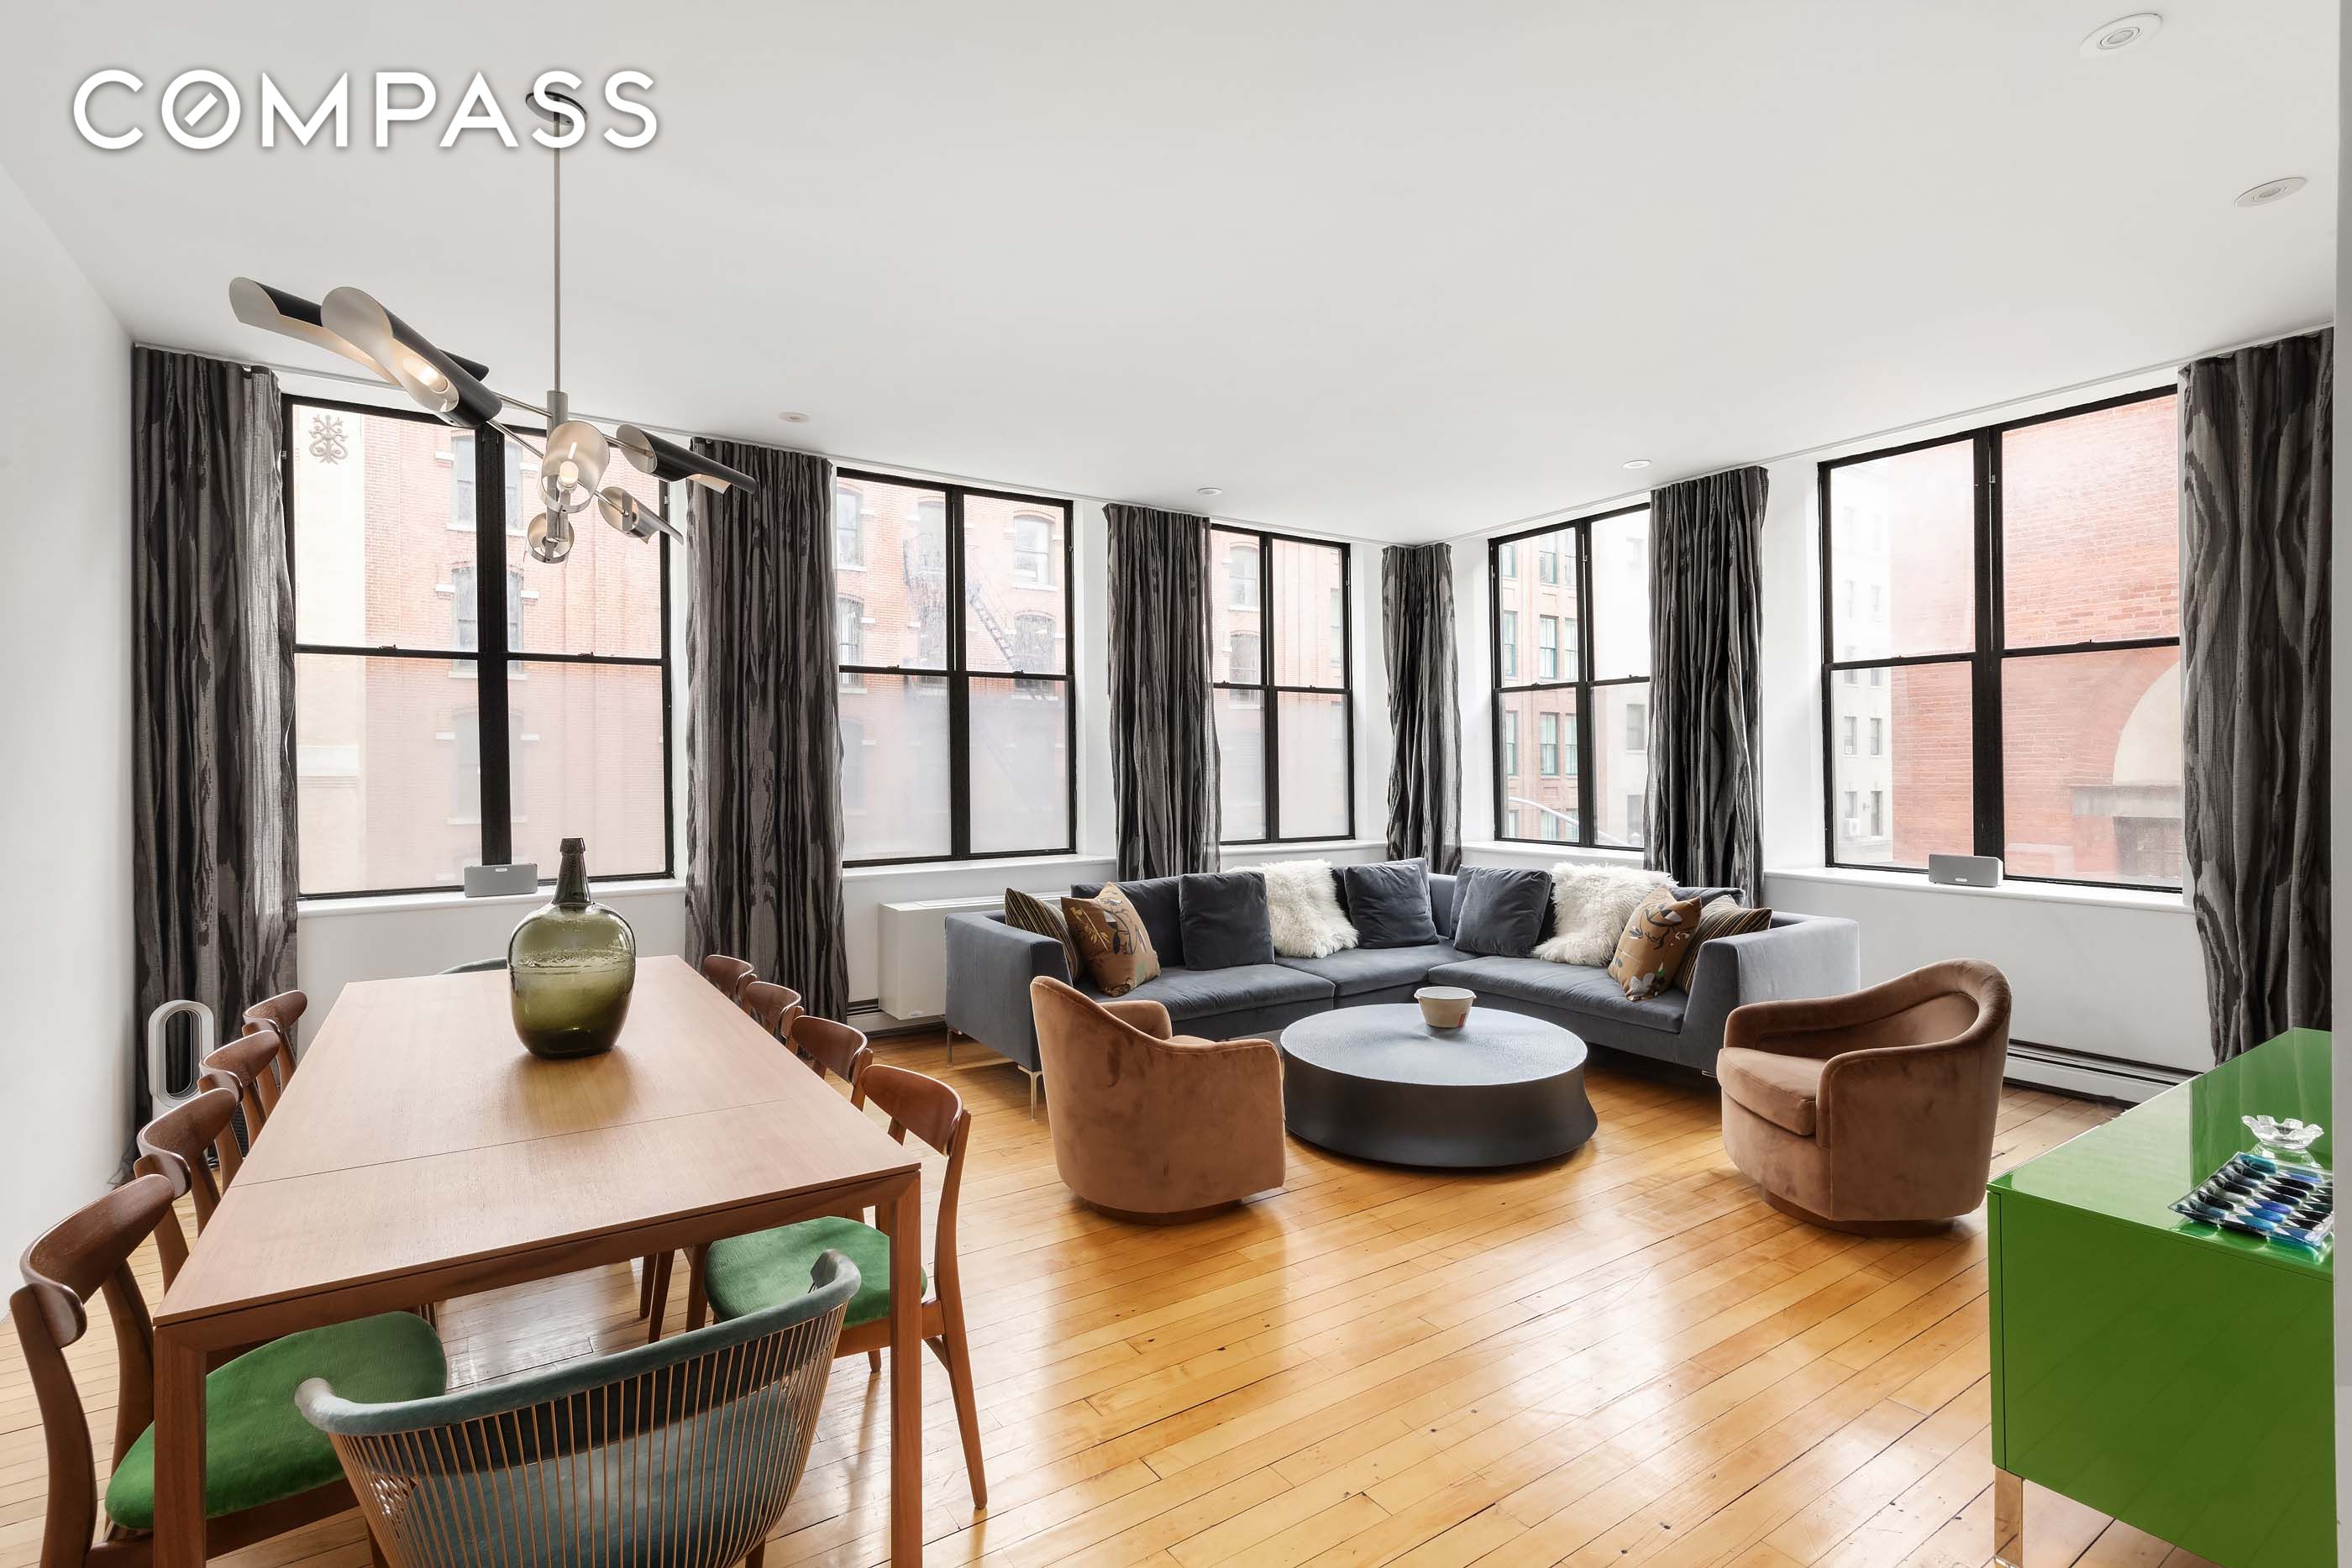 57 Laight Street 3, Tribeca, Downtown, NYC - 3 Bedrooms  
2.5 Bathrooms  
6 Rooms - 